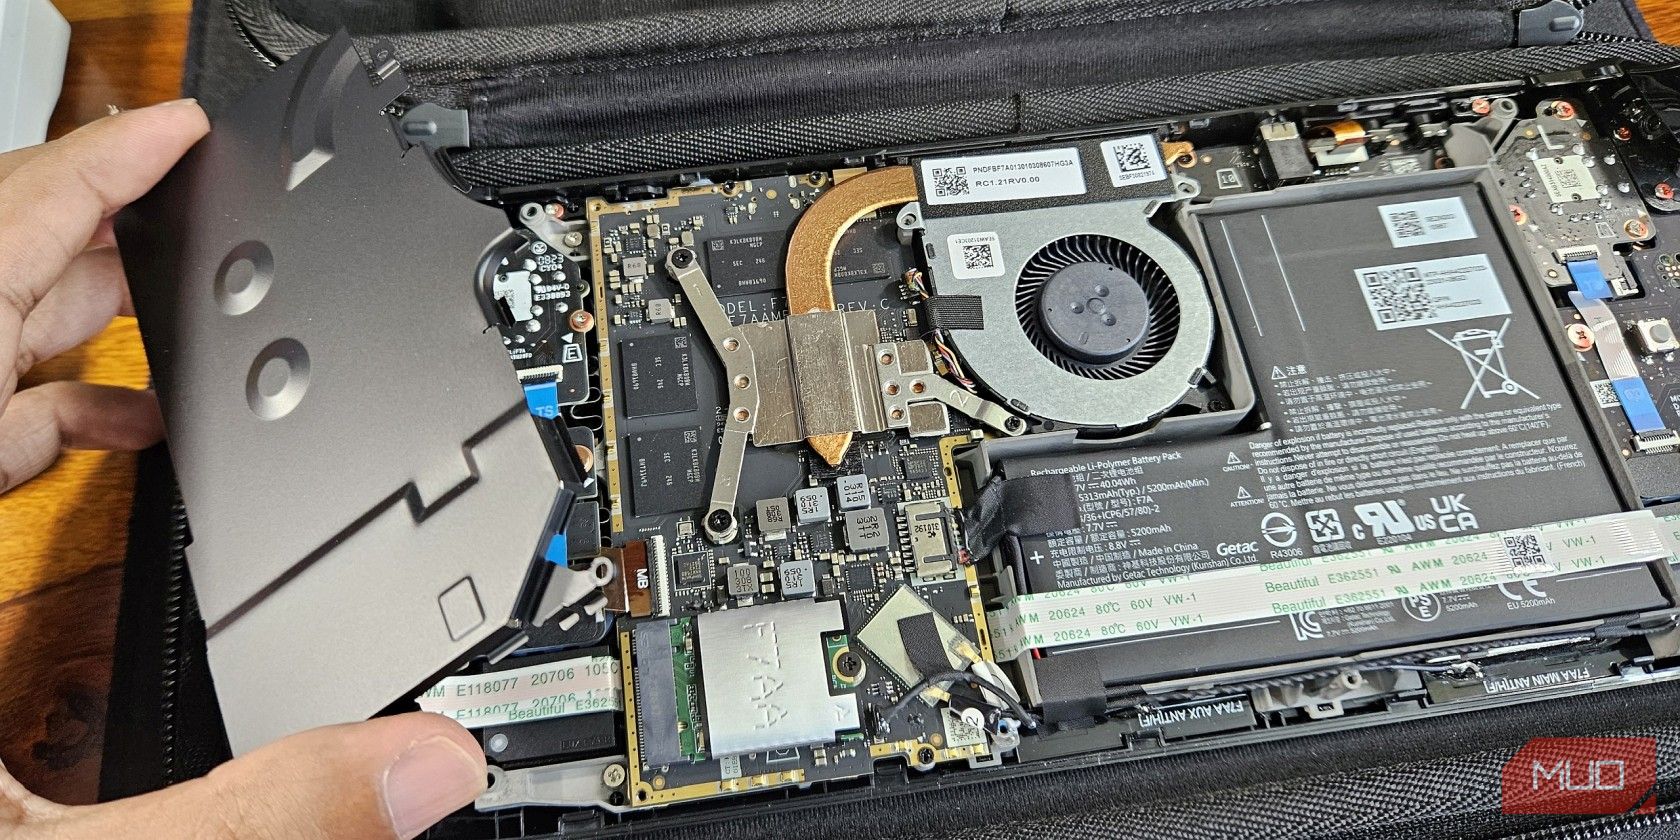 Steam Deck mainboard shield removed to reveal the SOC and SSD